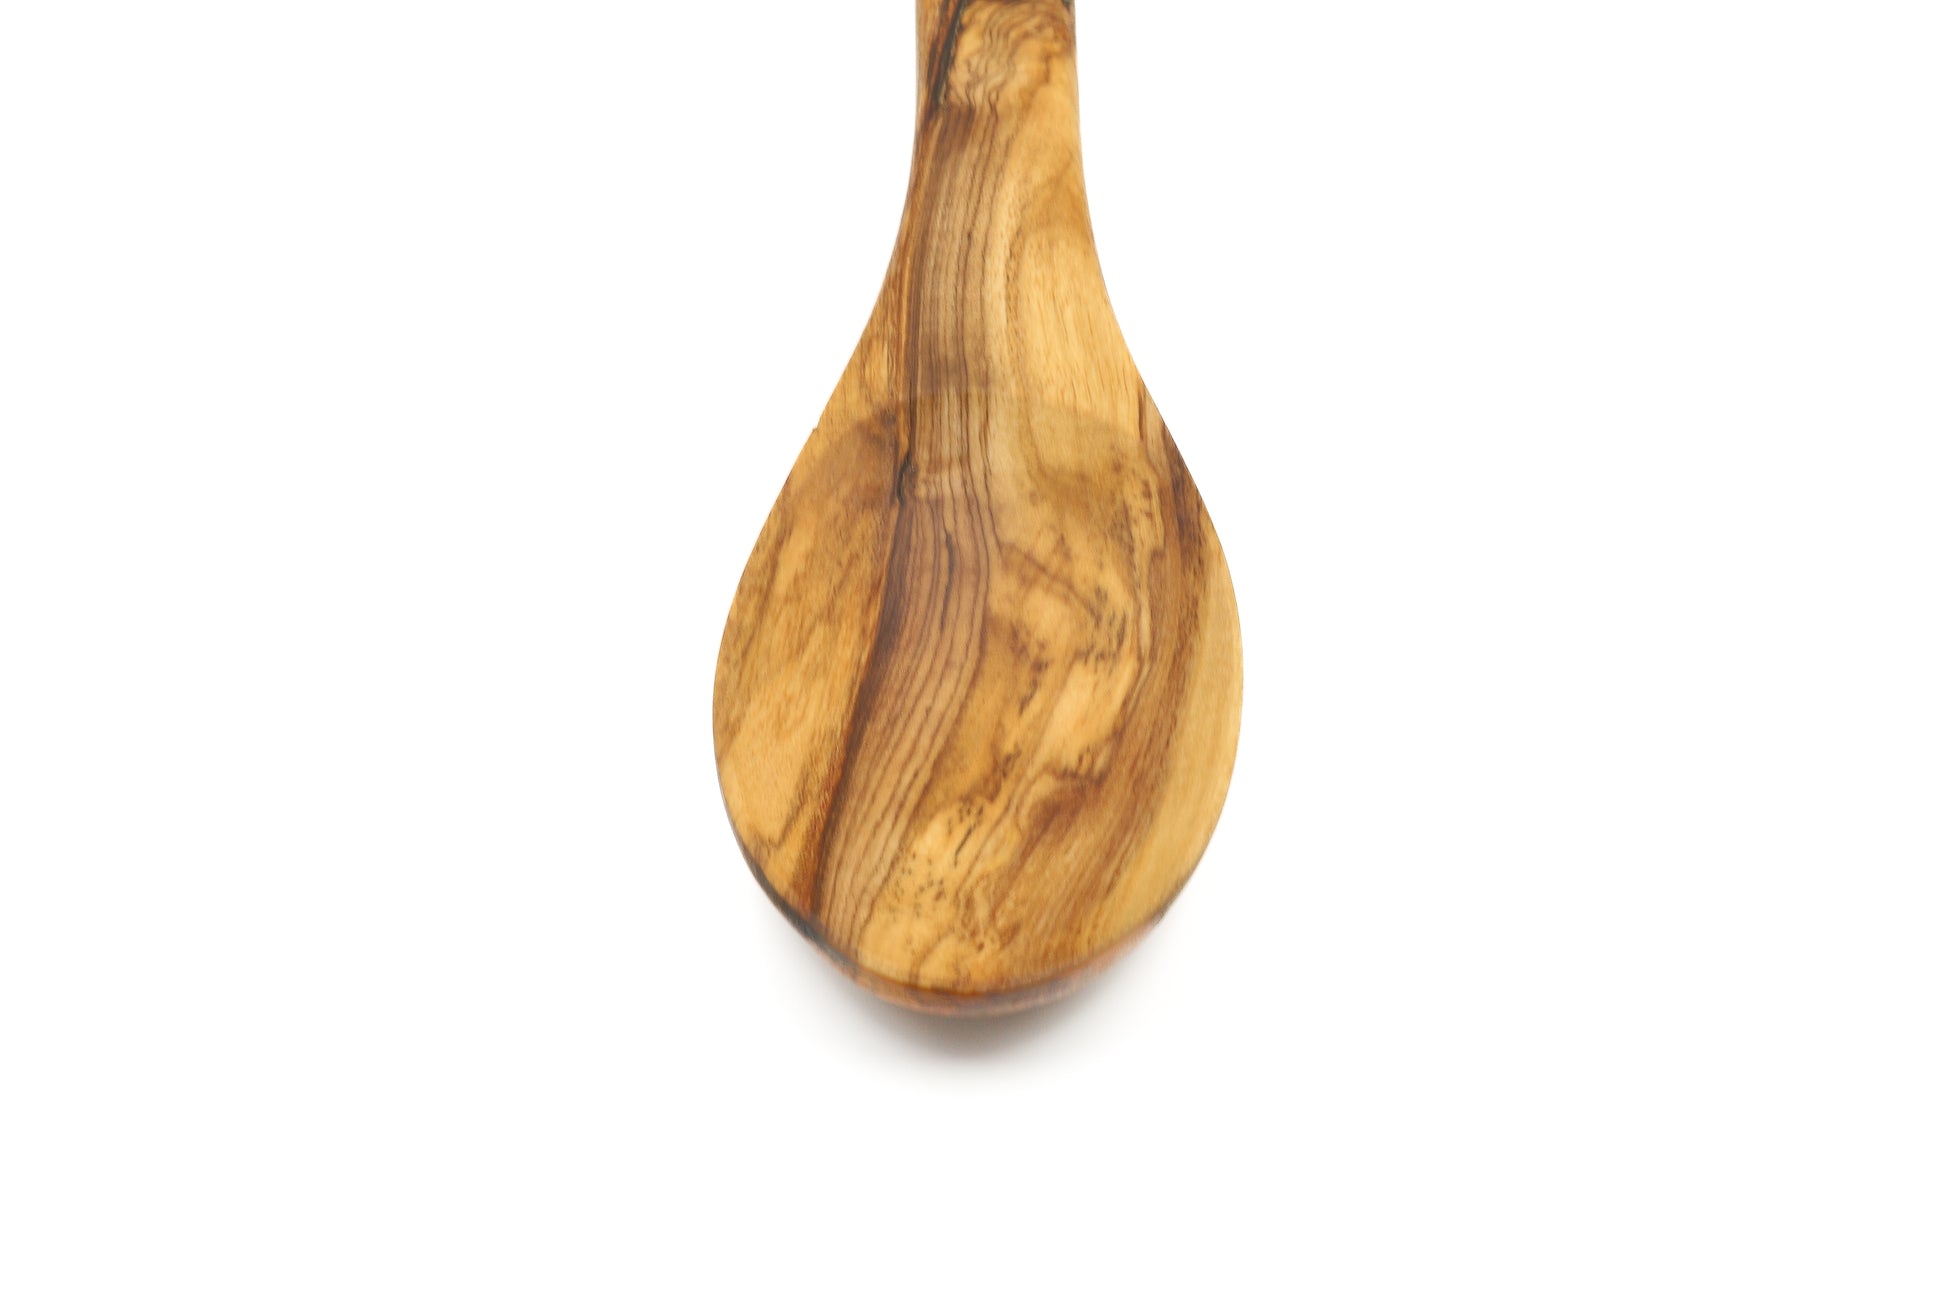 A versatile olive wood spoon for stirring, mixing, and cooking